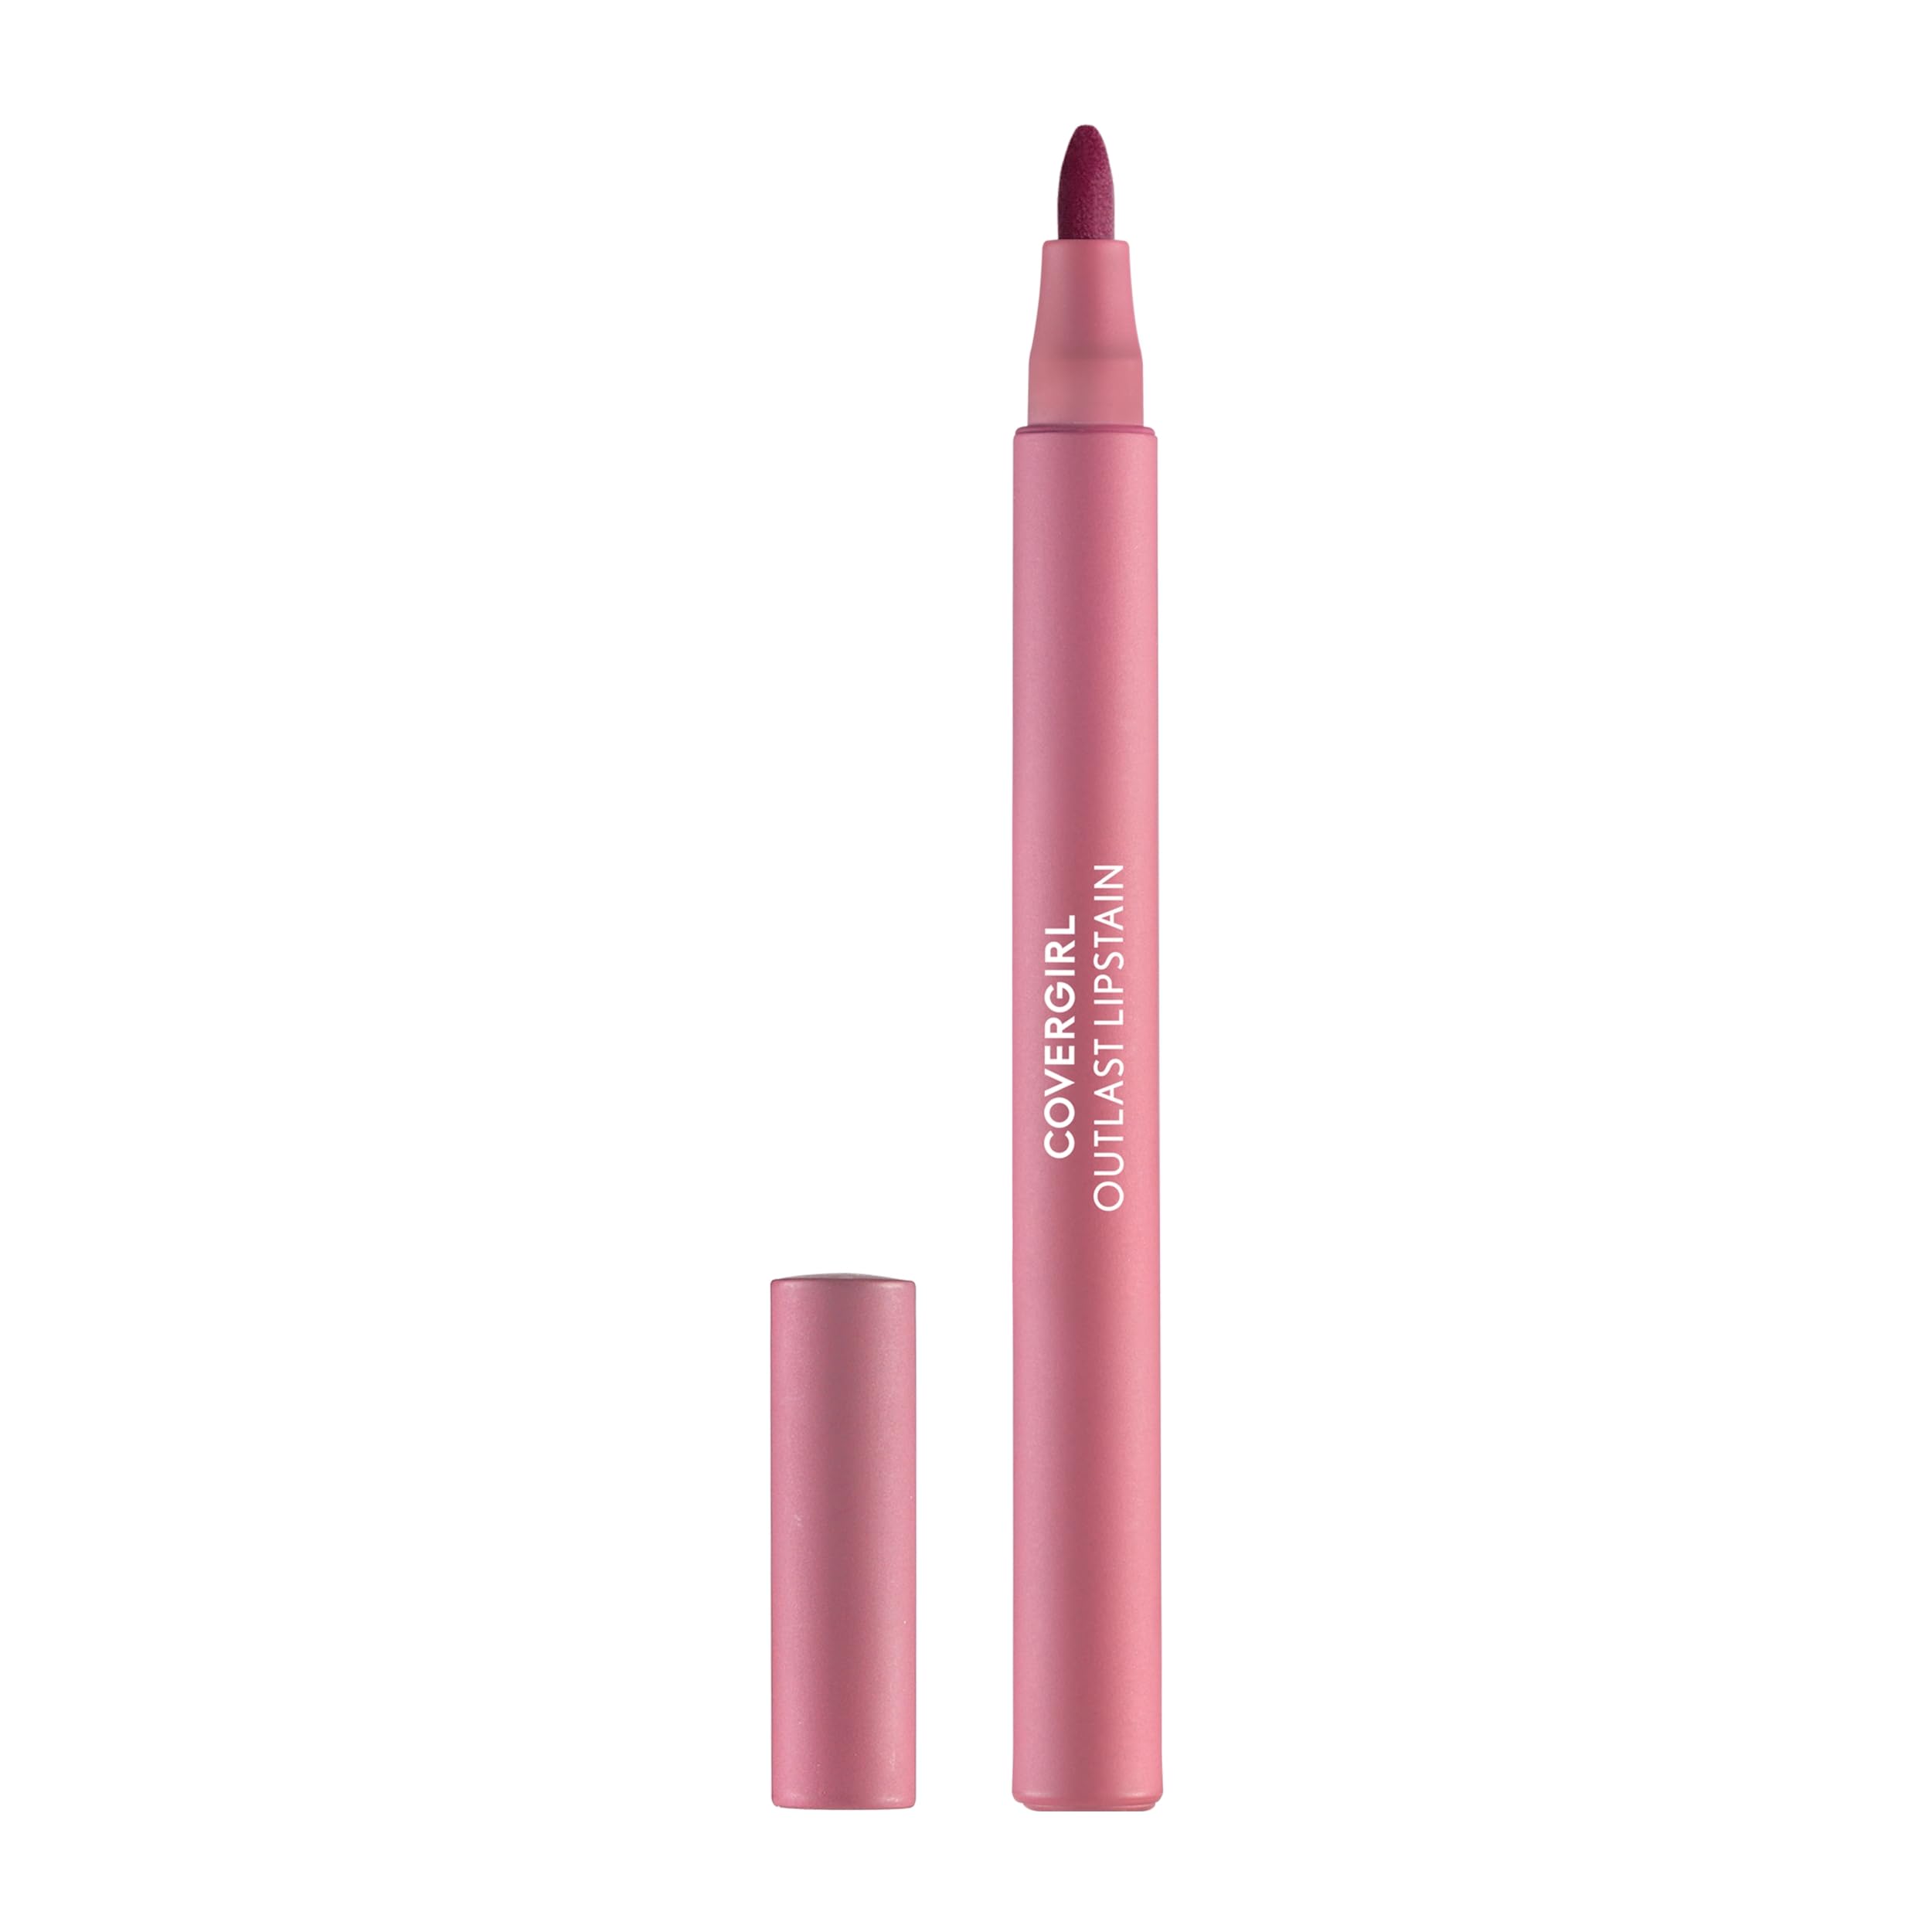 Covergirl Outlast, 20 Admire, Lipstain, Smooth Application, Precise Pen-Like Tip, Transfer-Proof, Satin Stained Finish, Vegan Formula, 0.06oz